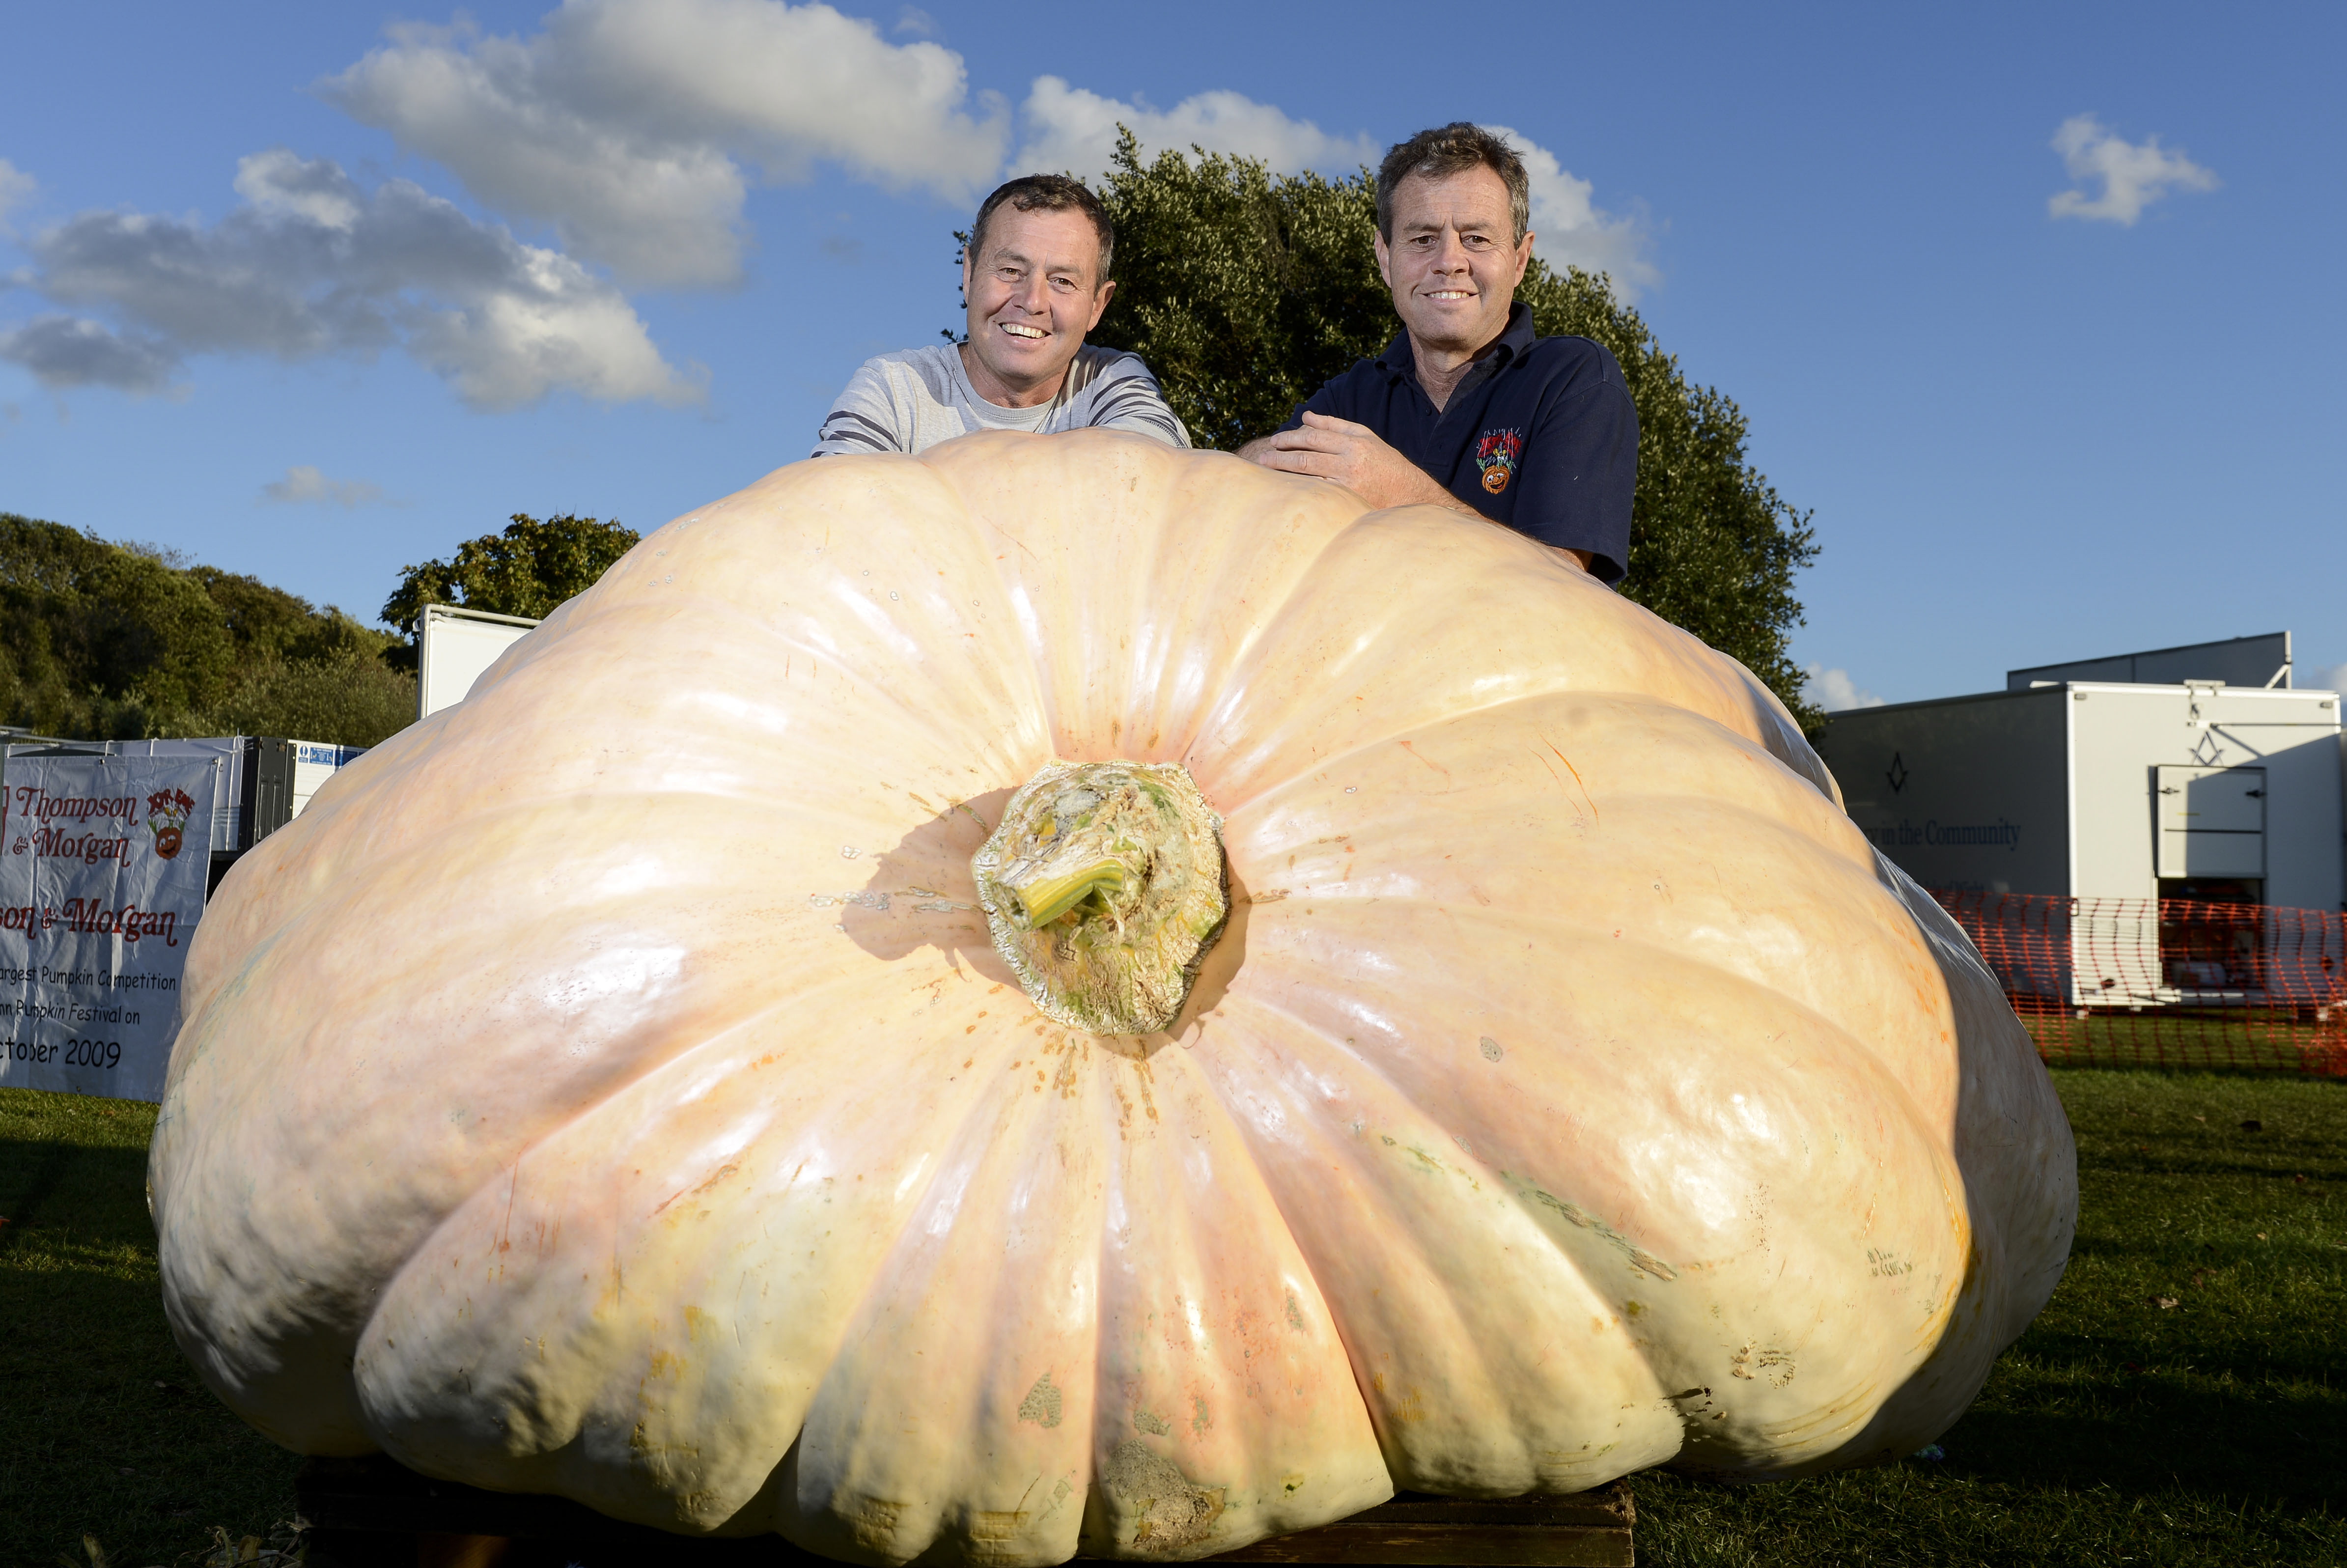 A pair of twins have broken the UK record for growing the heaviest pumpkin ever - weighing in at a monstrous 1,884 pounds. Brothers Ian and Stuart Paton, 53, previously held the record until it was beaten by a pumpkin last year that weighed 1,520 pounds. But moments before they smashed the British record, farmer Mark Baggs from Dorset thought he had set it himself with a massive 1,582 pounds. However, the Patons, from Pennington, Hants, were last up at an annual weigh-in of the UK's biggest pumpkin. And amazingly, they smashed the record with their enormous 4.5ft tall pumpkin, which has a circumference of 17ft and 4in. SEE OUR COPY FOR MORE DETAILS. Pictured: Stuart Paton (left) and Ian Paton (right) with their pumpkin. © Tom Harrison/Solent News & Photo Agency UK +44 (0) 2380 458800